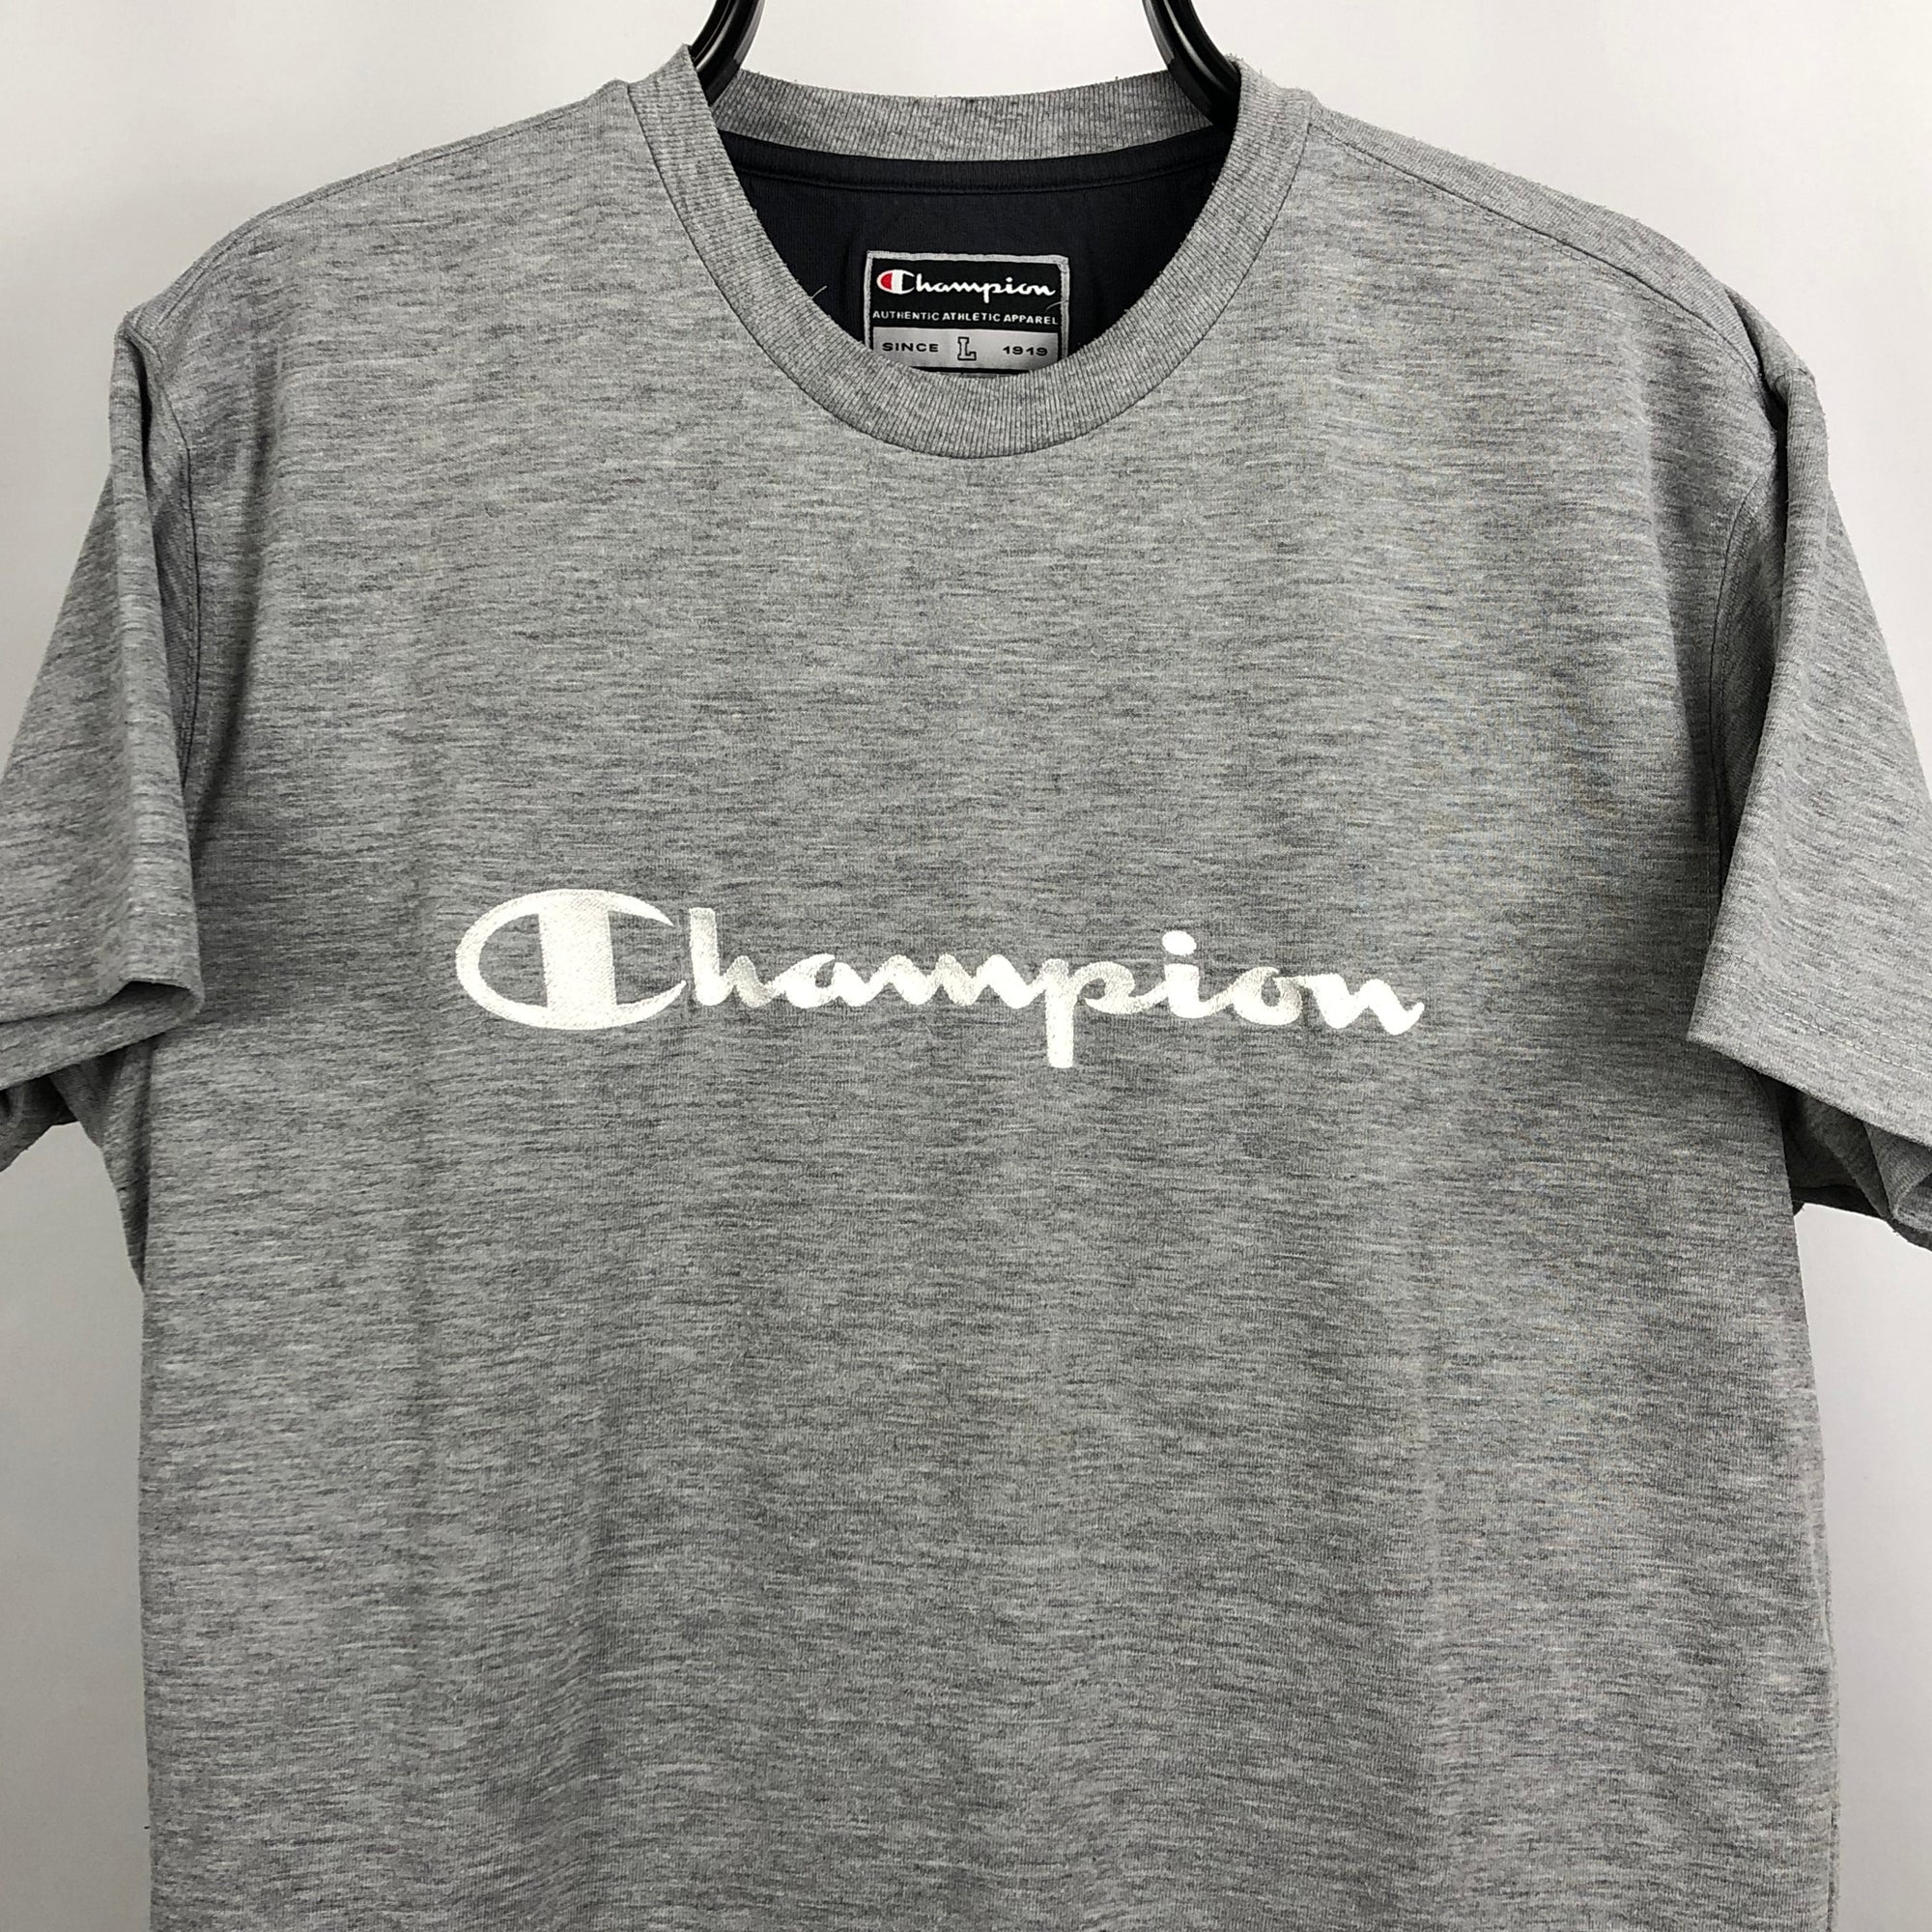 Vintage Champion Embroidered Spellout Tee - Men's Medium/Women's Large